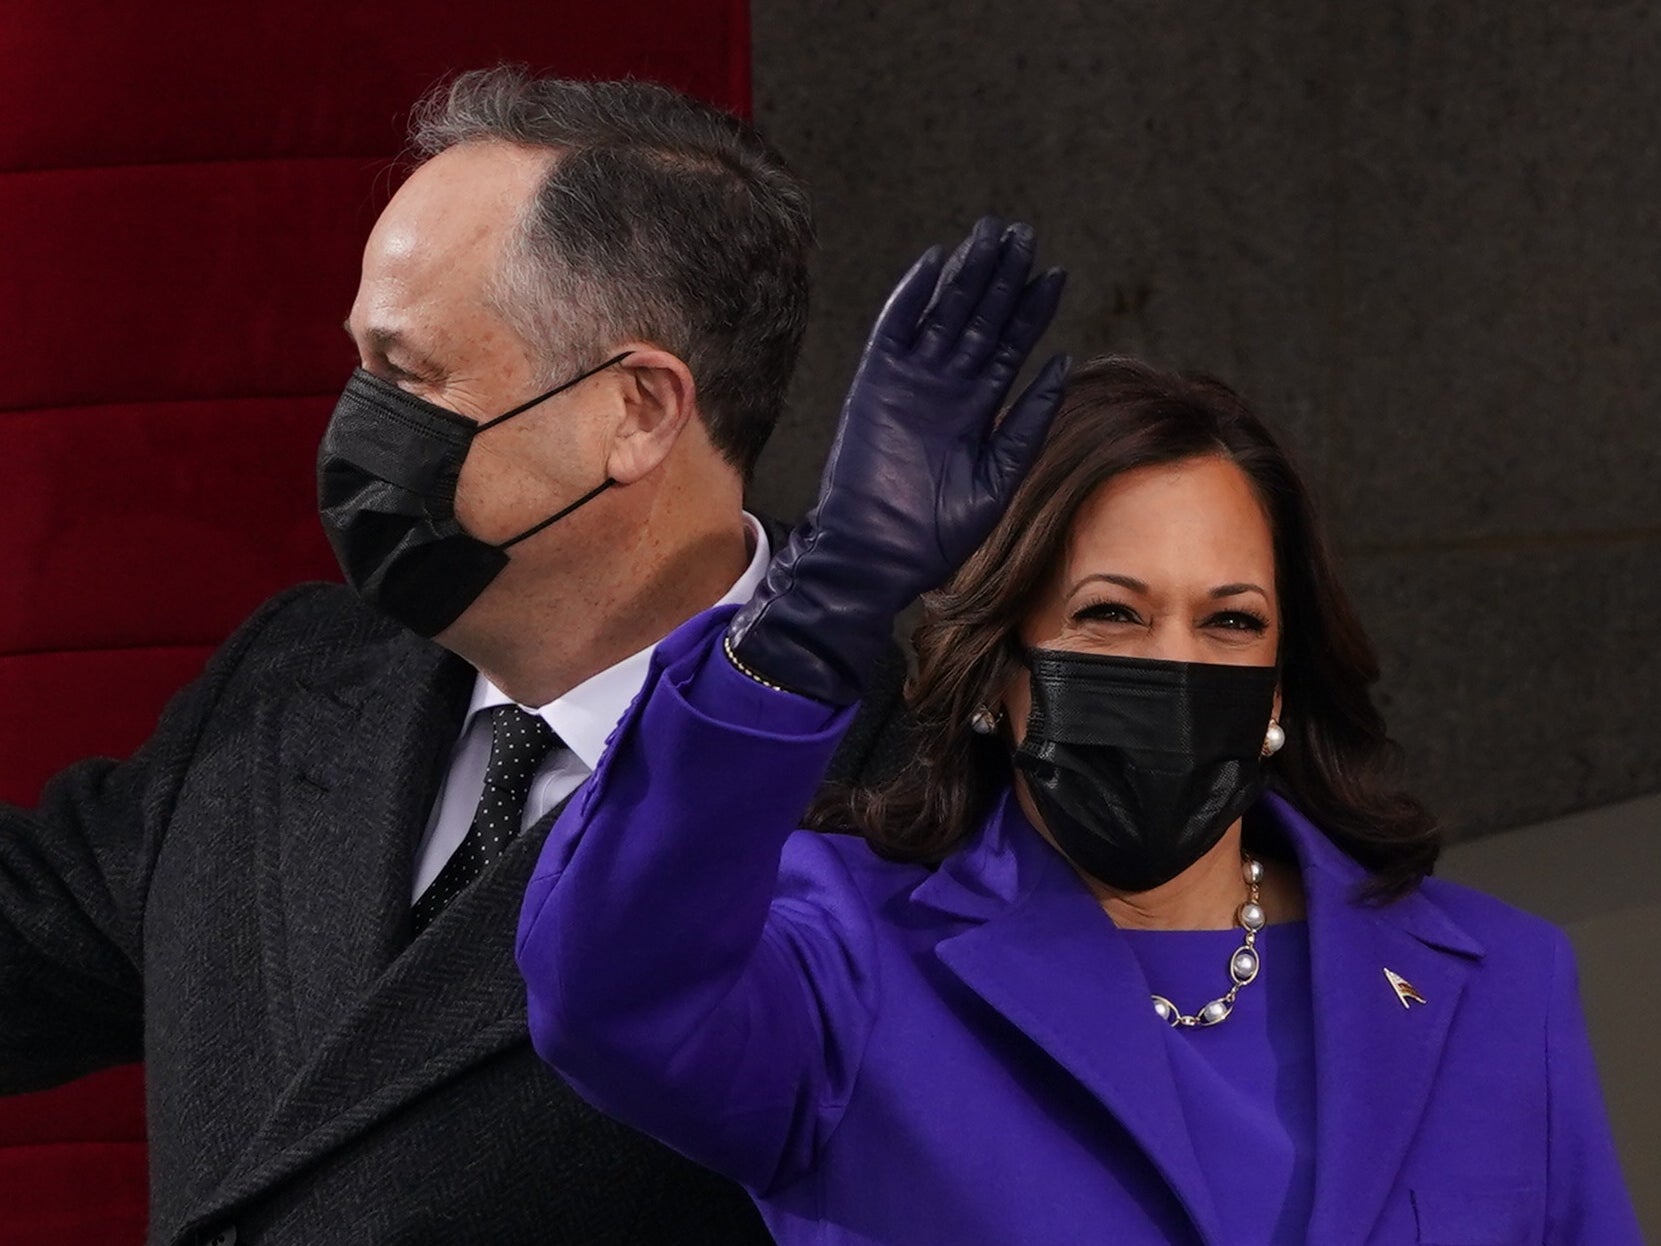 Vice-president elect Kamala Harris and her husband Doug Emhoff wave as they make their entrance to the inaugural ceremony on the West Front of the Capitol